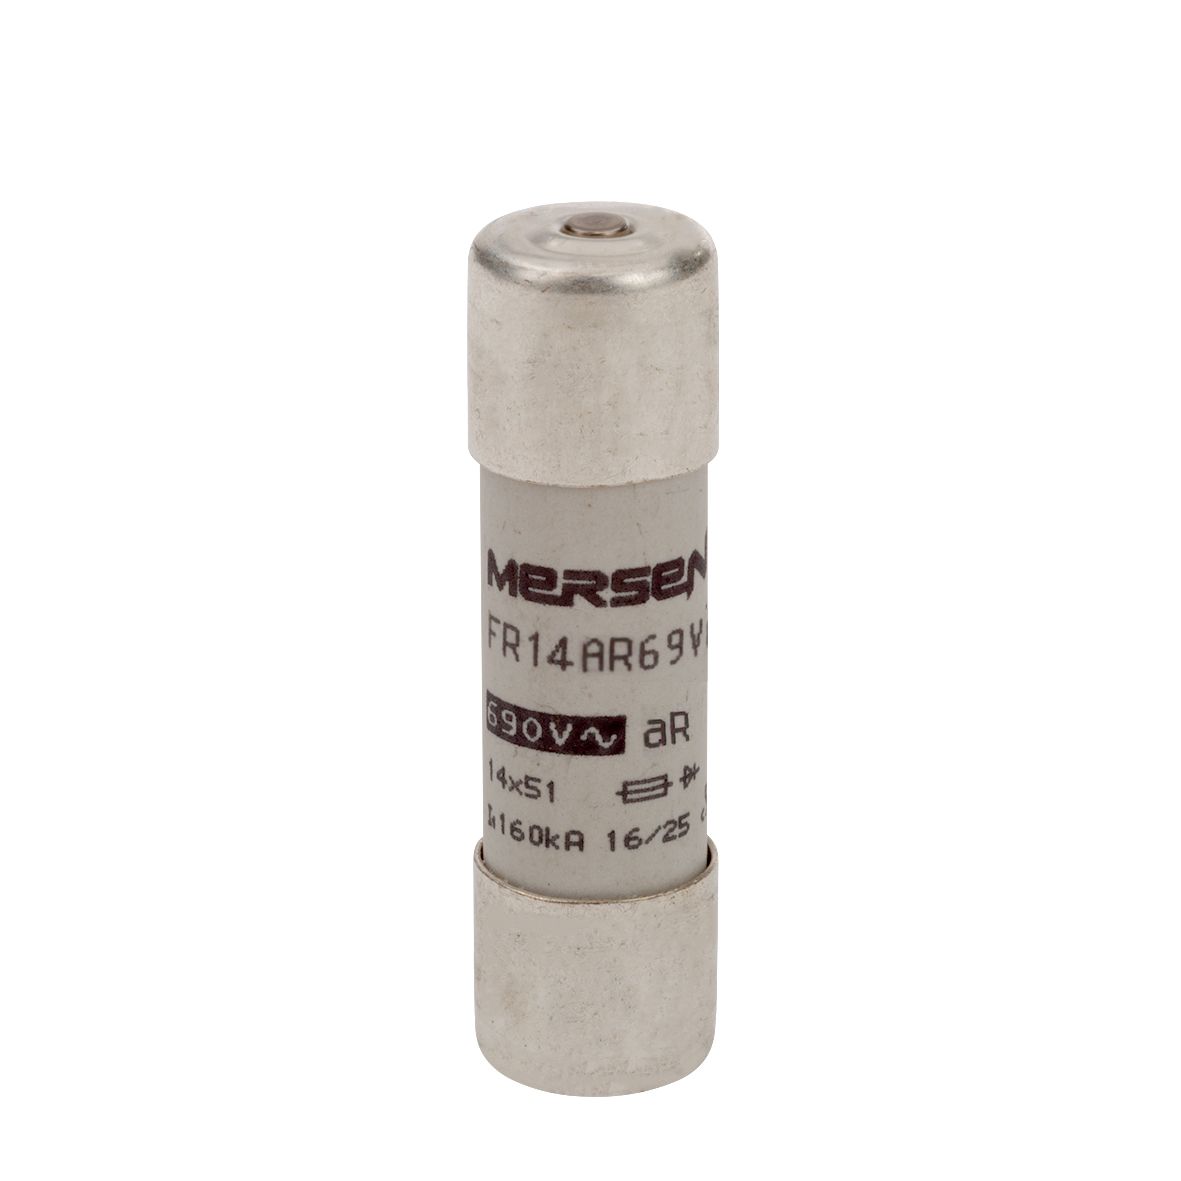 X1056663 - Cylindrical fuse-link aR 690VAC 14x51, 32A, with indicator